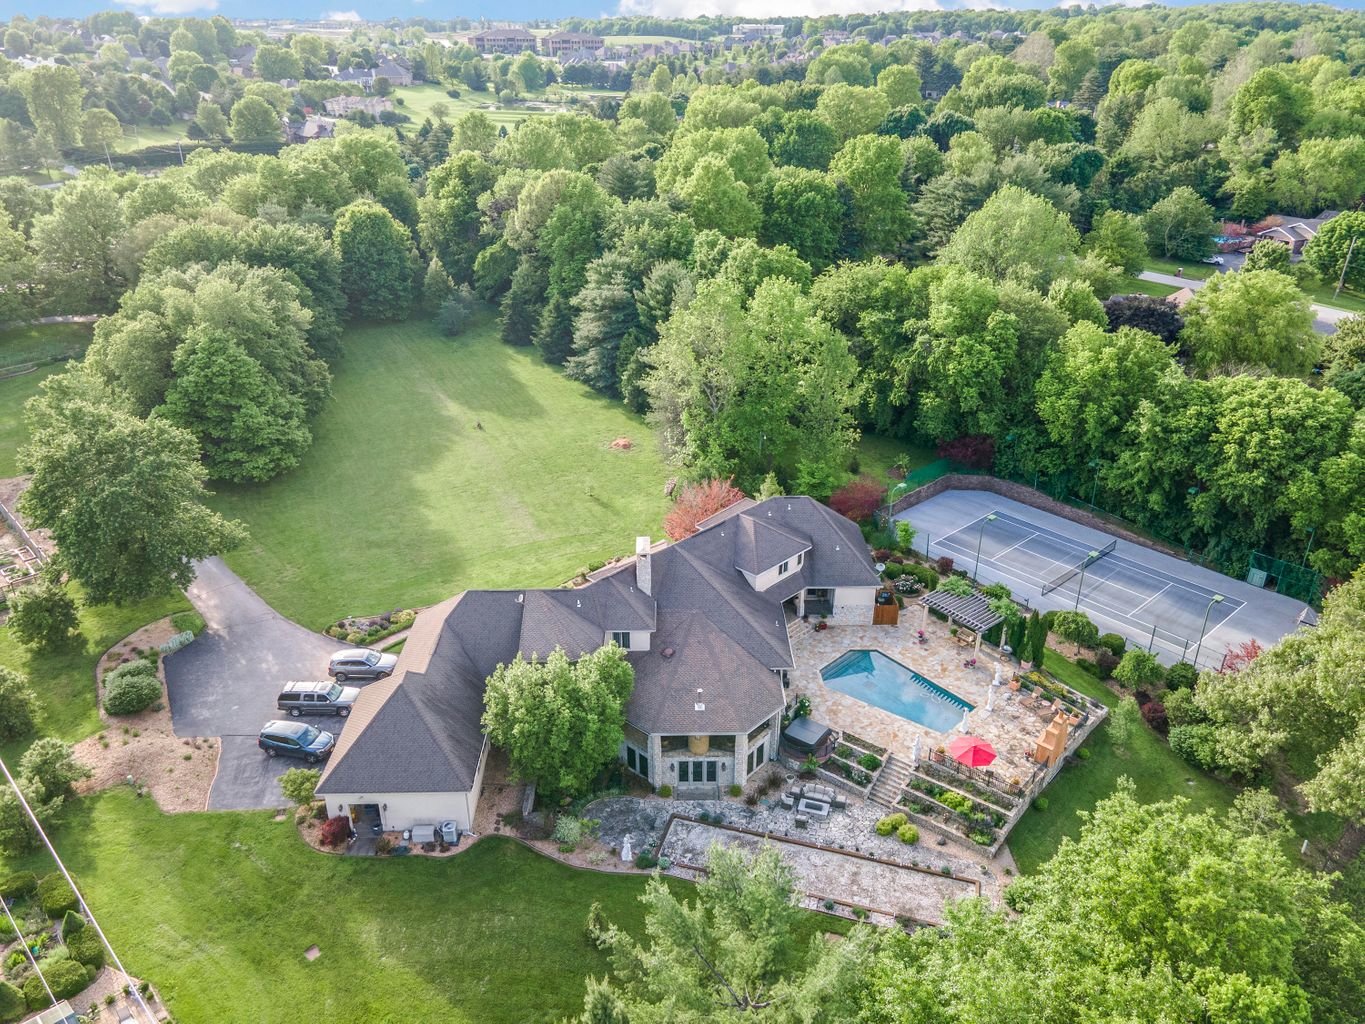 4095 E. Farm Road 164
$1.85 million
Bedrooms: 4
Bathrooms: 6
Listing firm: AMax Real Estate